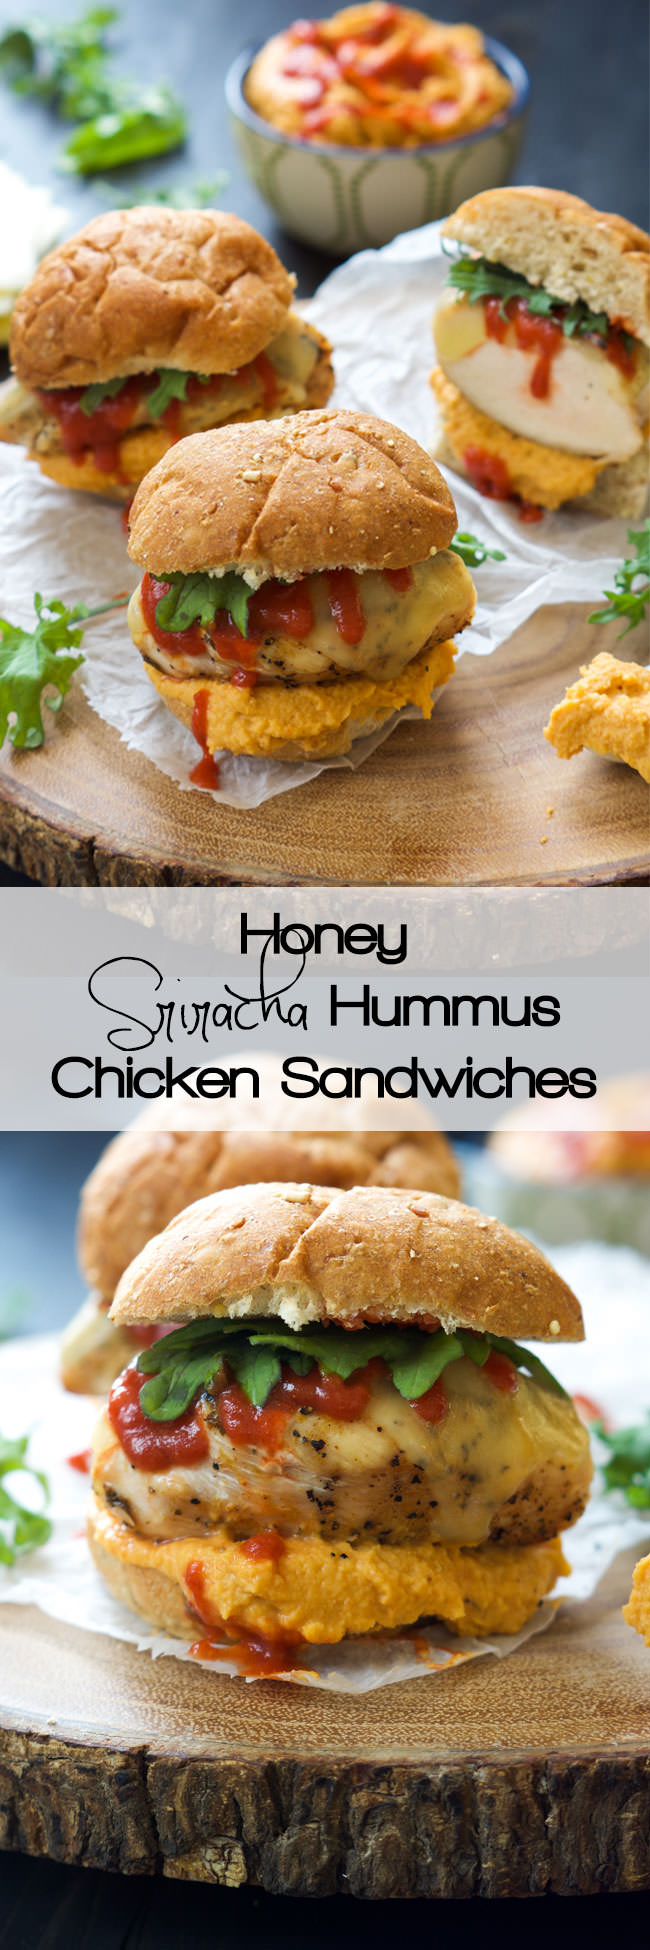 Sweet and spicy Honey Sriracha Hummus tops a juicy chicken sandwich loaded with gooey provolone for one flavorful bite!